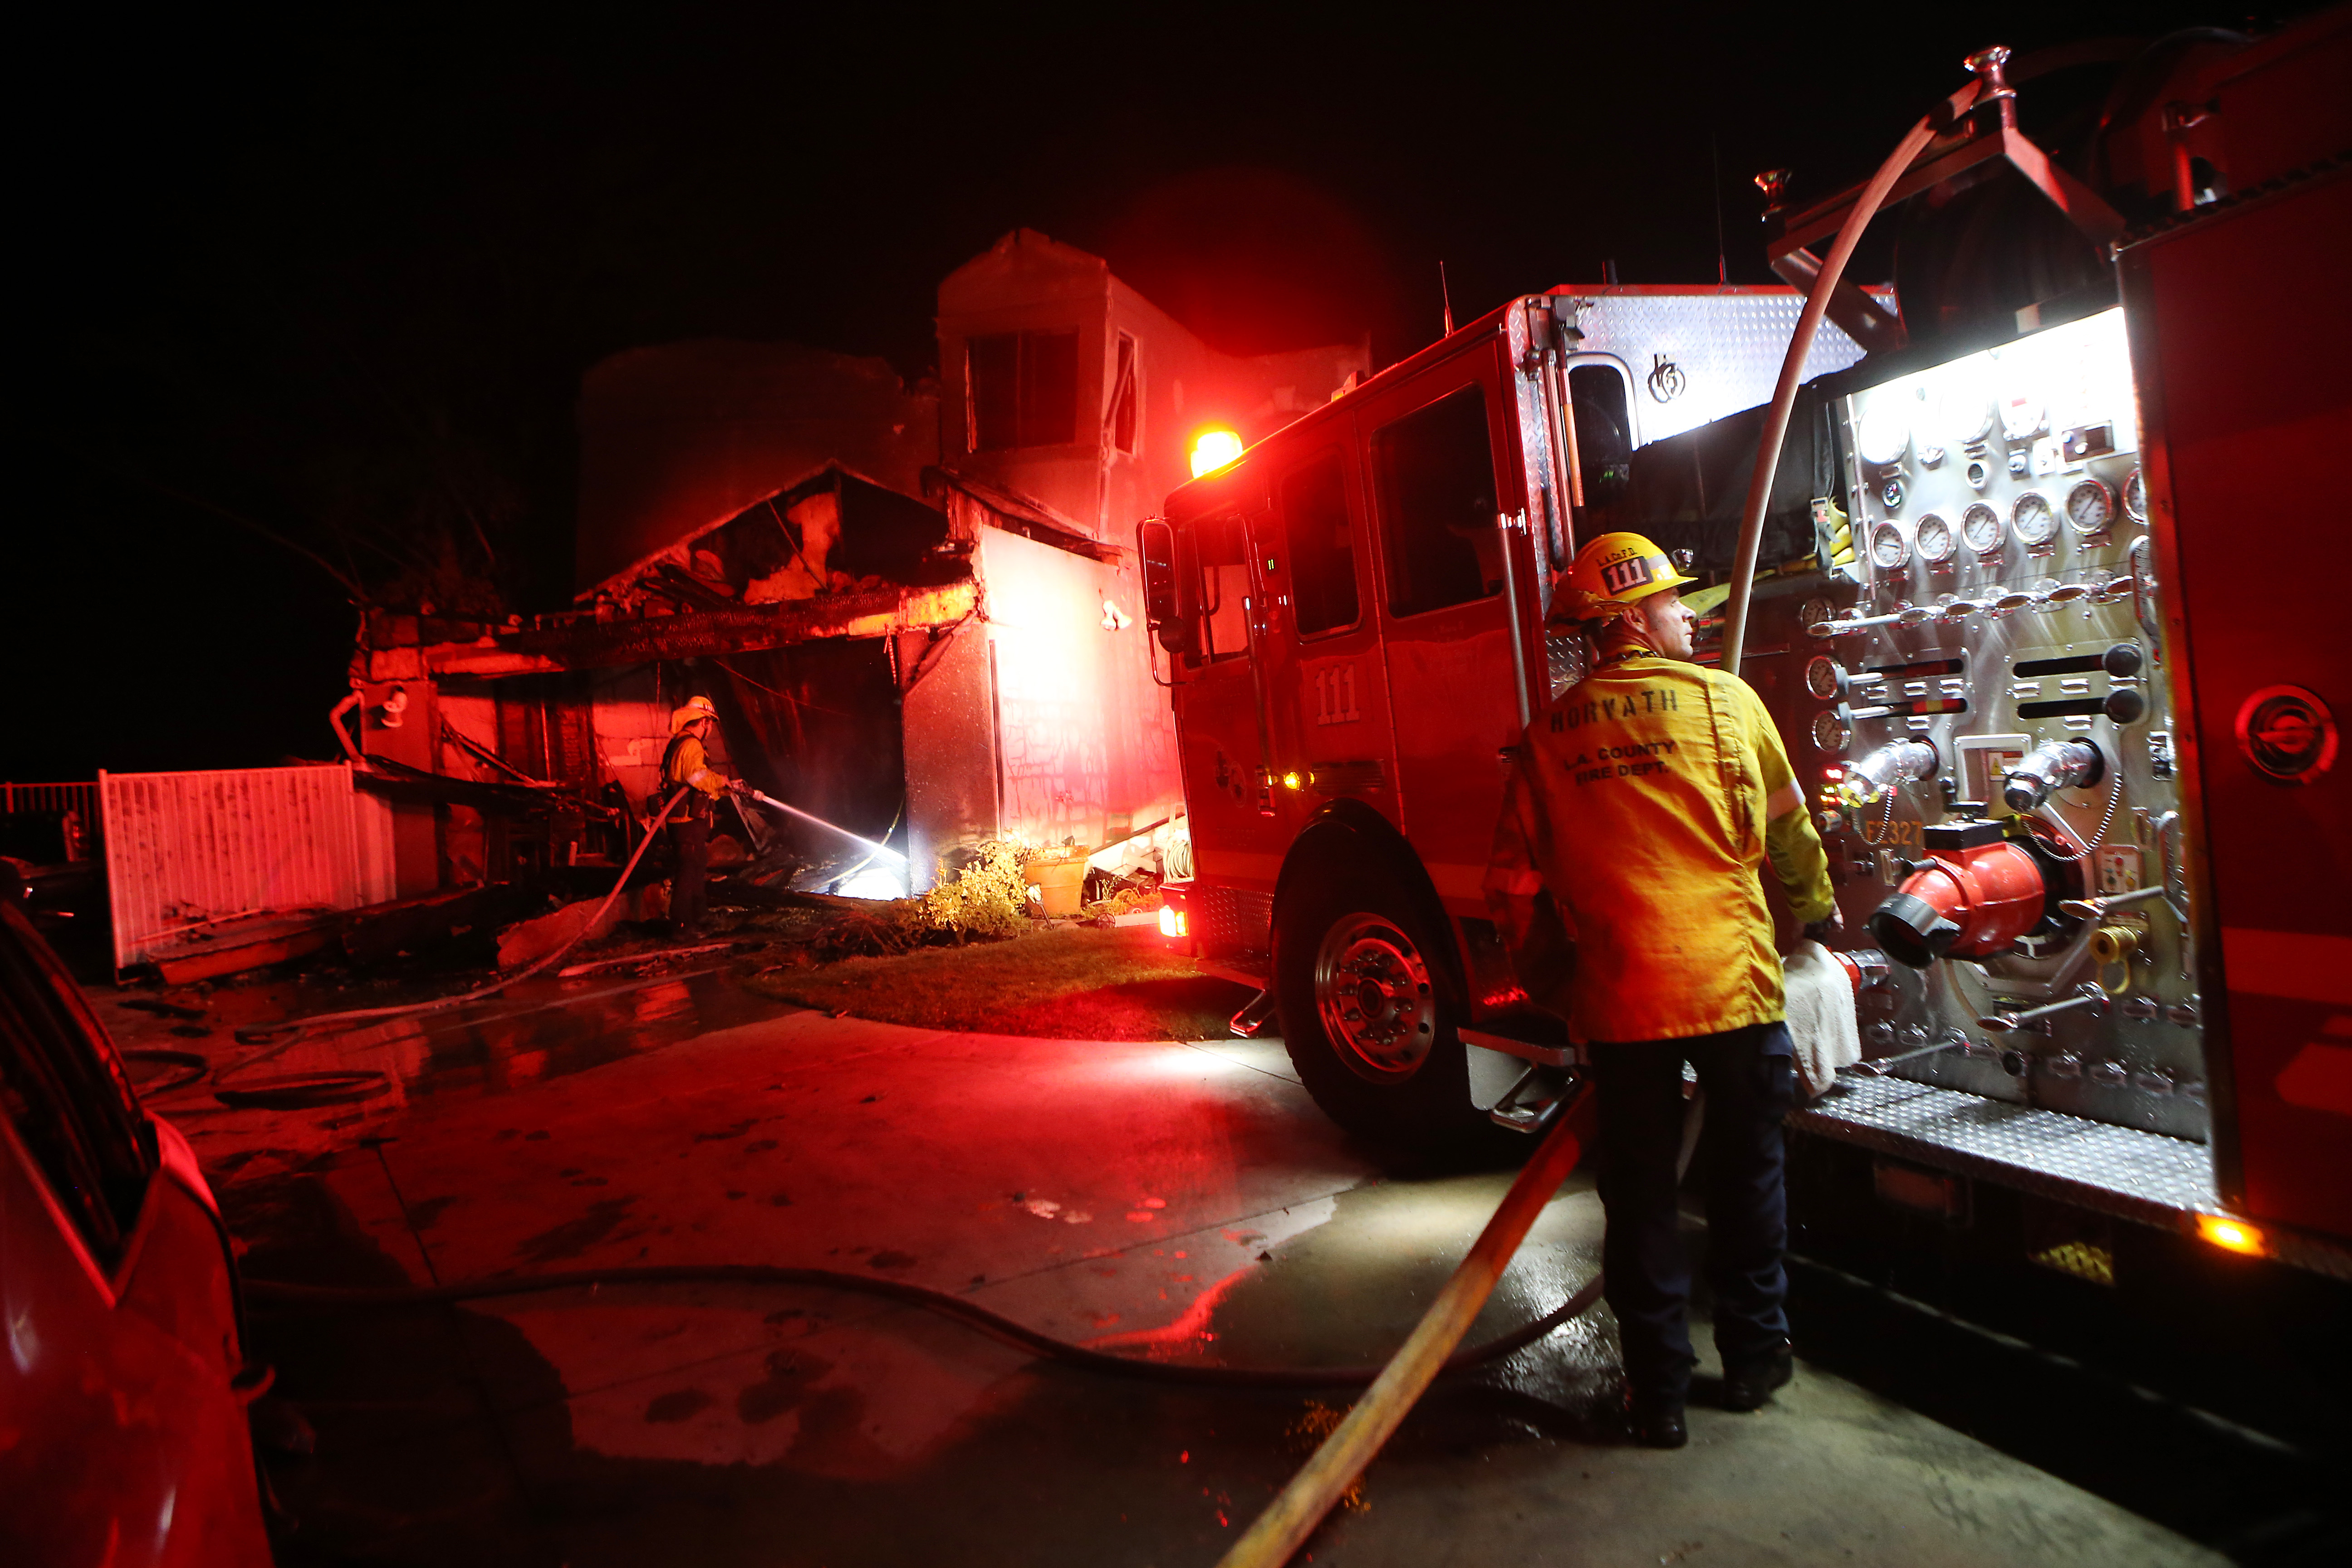 Los Angeles County Fire Department firefighters work at a home destroyed by the Tick Fire on October 24, 2019 in Canyon Country, California.